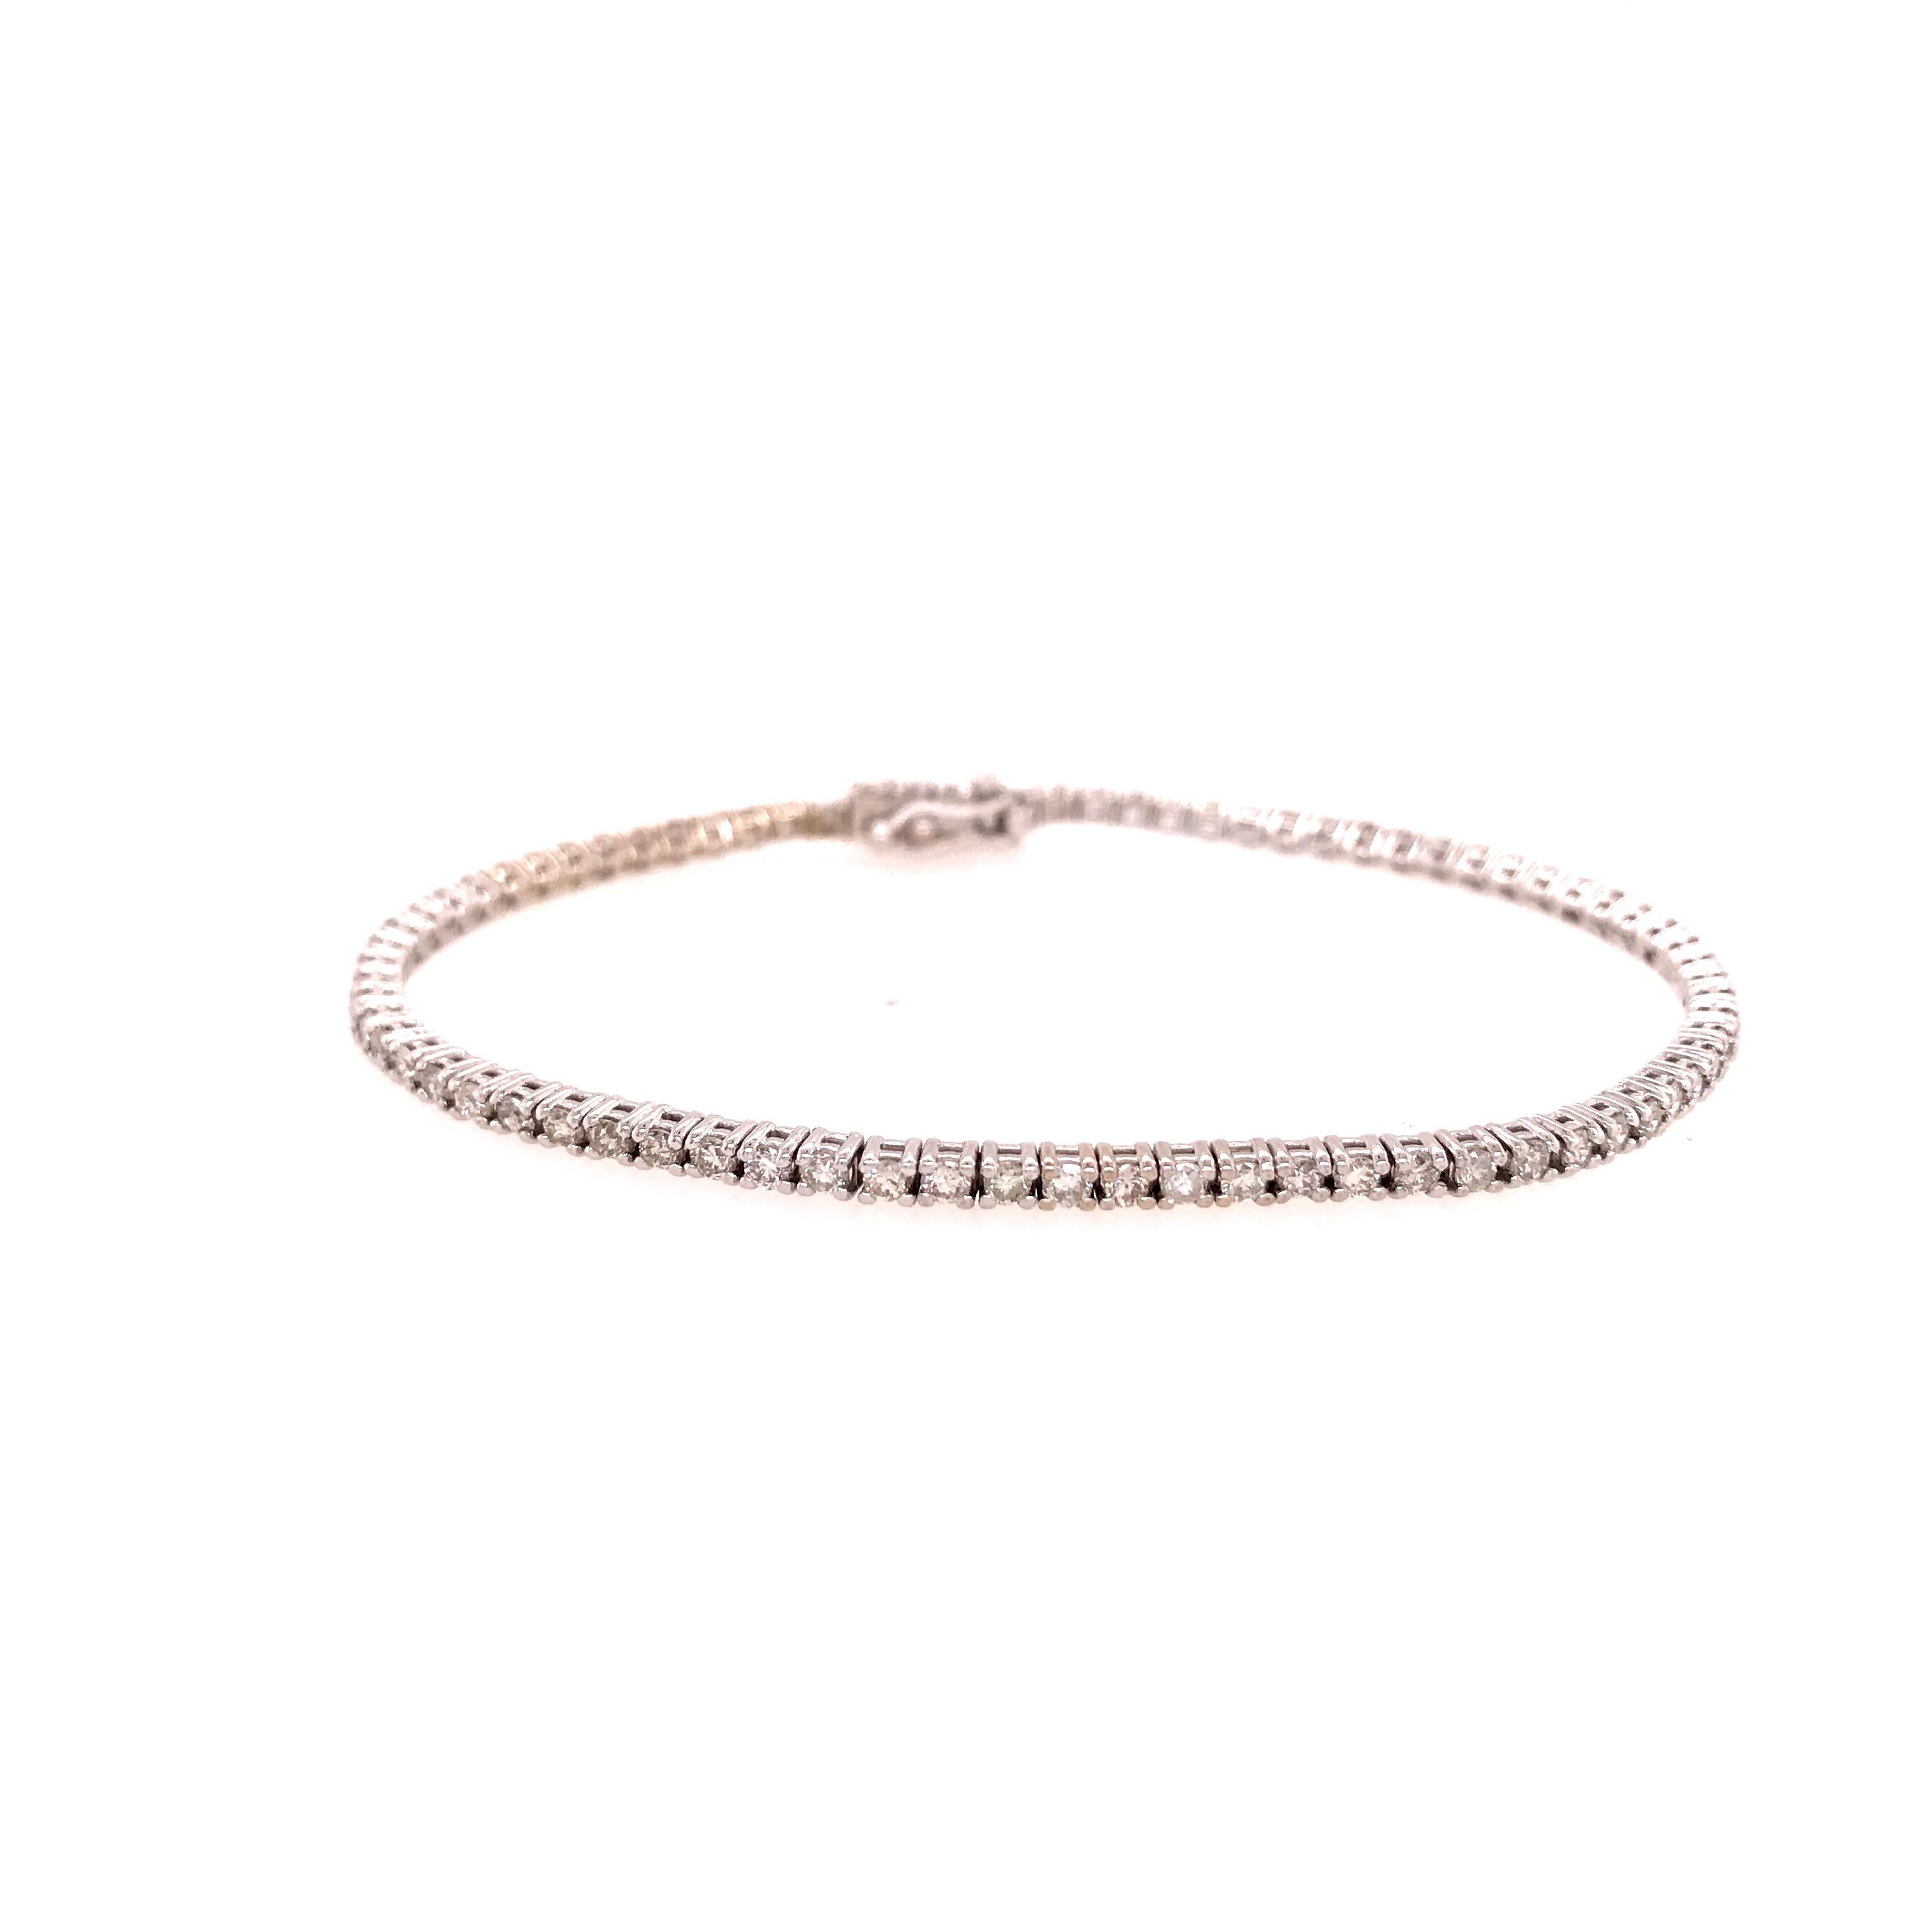 A beautiful classic Diamond Tennis Bracelet in 14K White Gold.  (76) Round Brilliant Cut Diamonds 1.52 carat total weight, G-H in color, VS-SI in clarity are expertly set in this bracelet.  6 3/4 inches long, approximately 2/8 inch wide and weighs